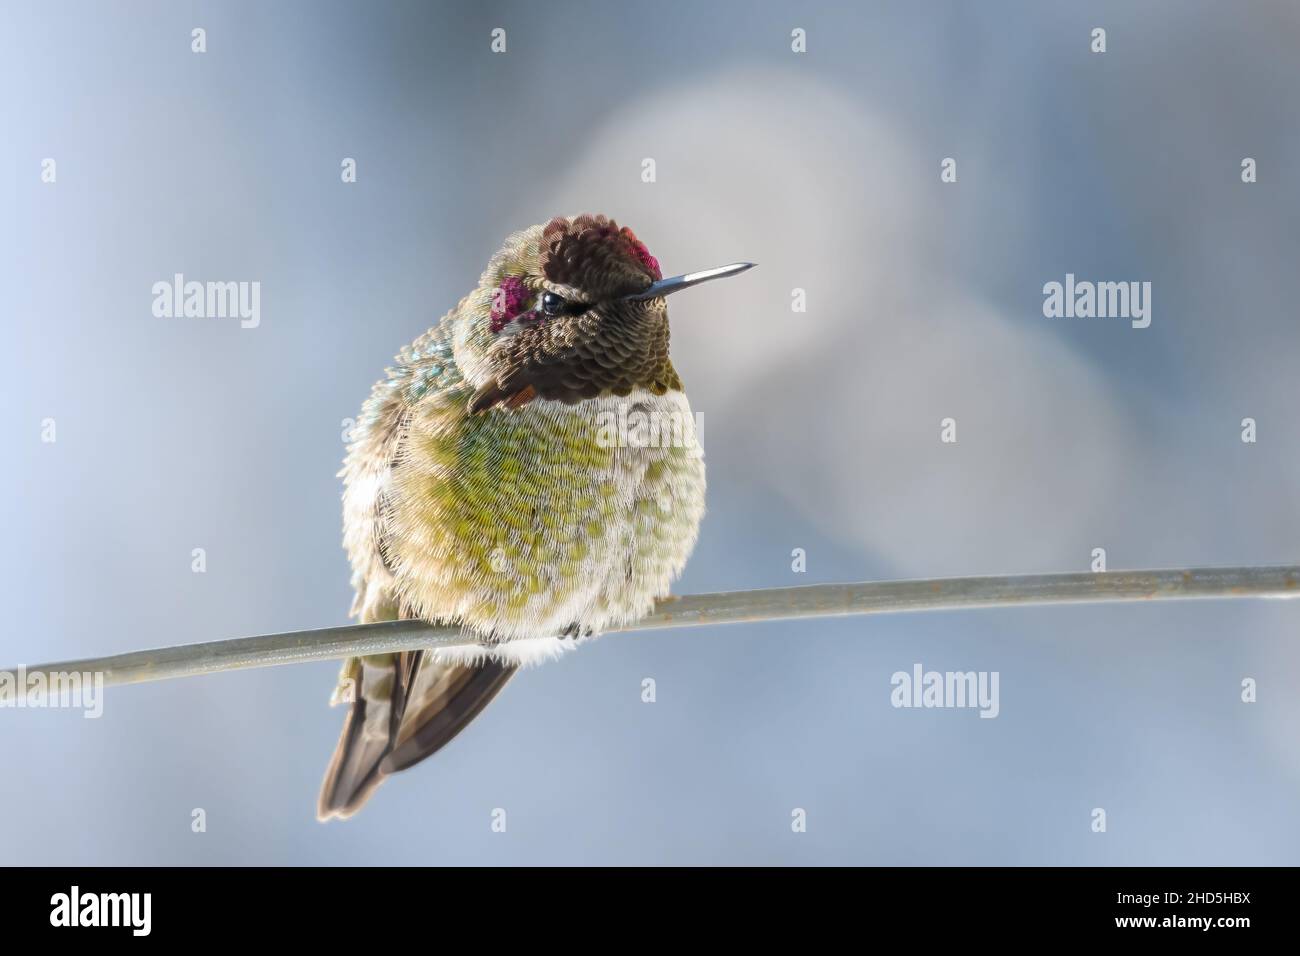 A wintering Anna's Hummingbird in Western Washington State rests on a thin piece of wire on a cold and crisp winter day Stock Photo